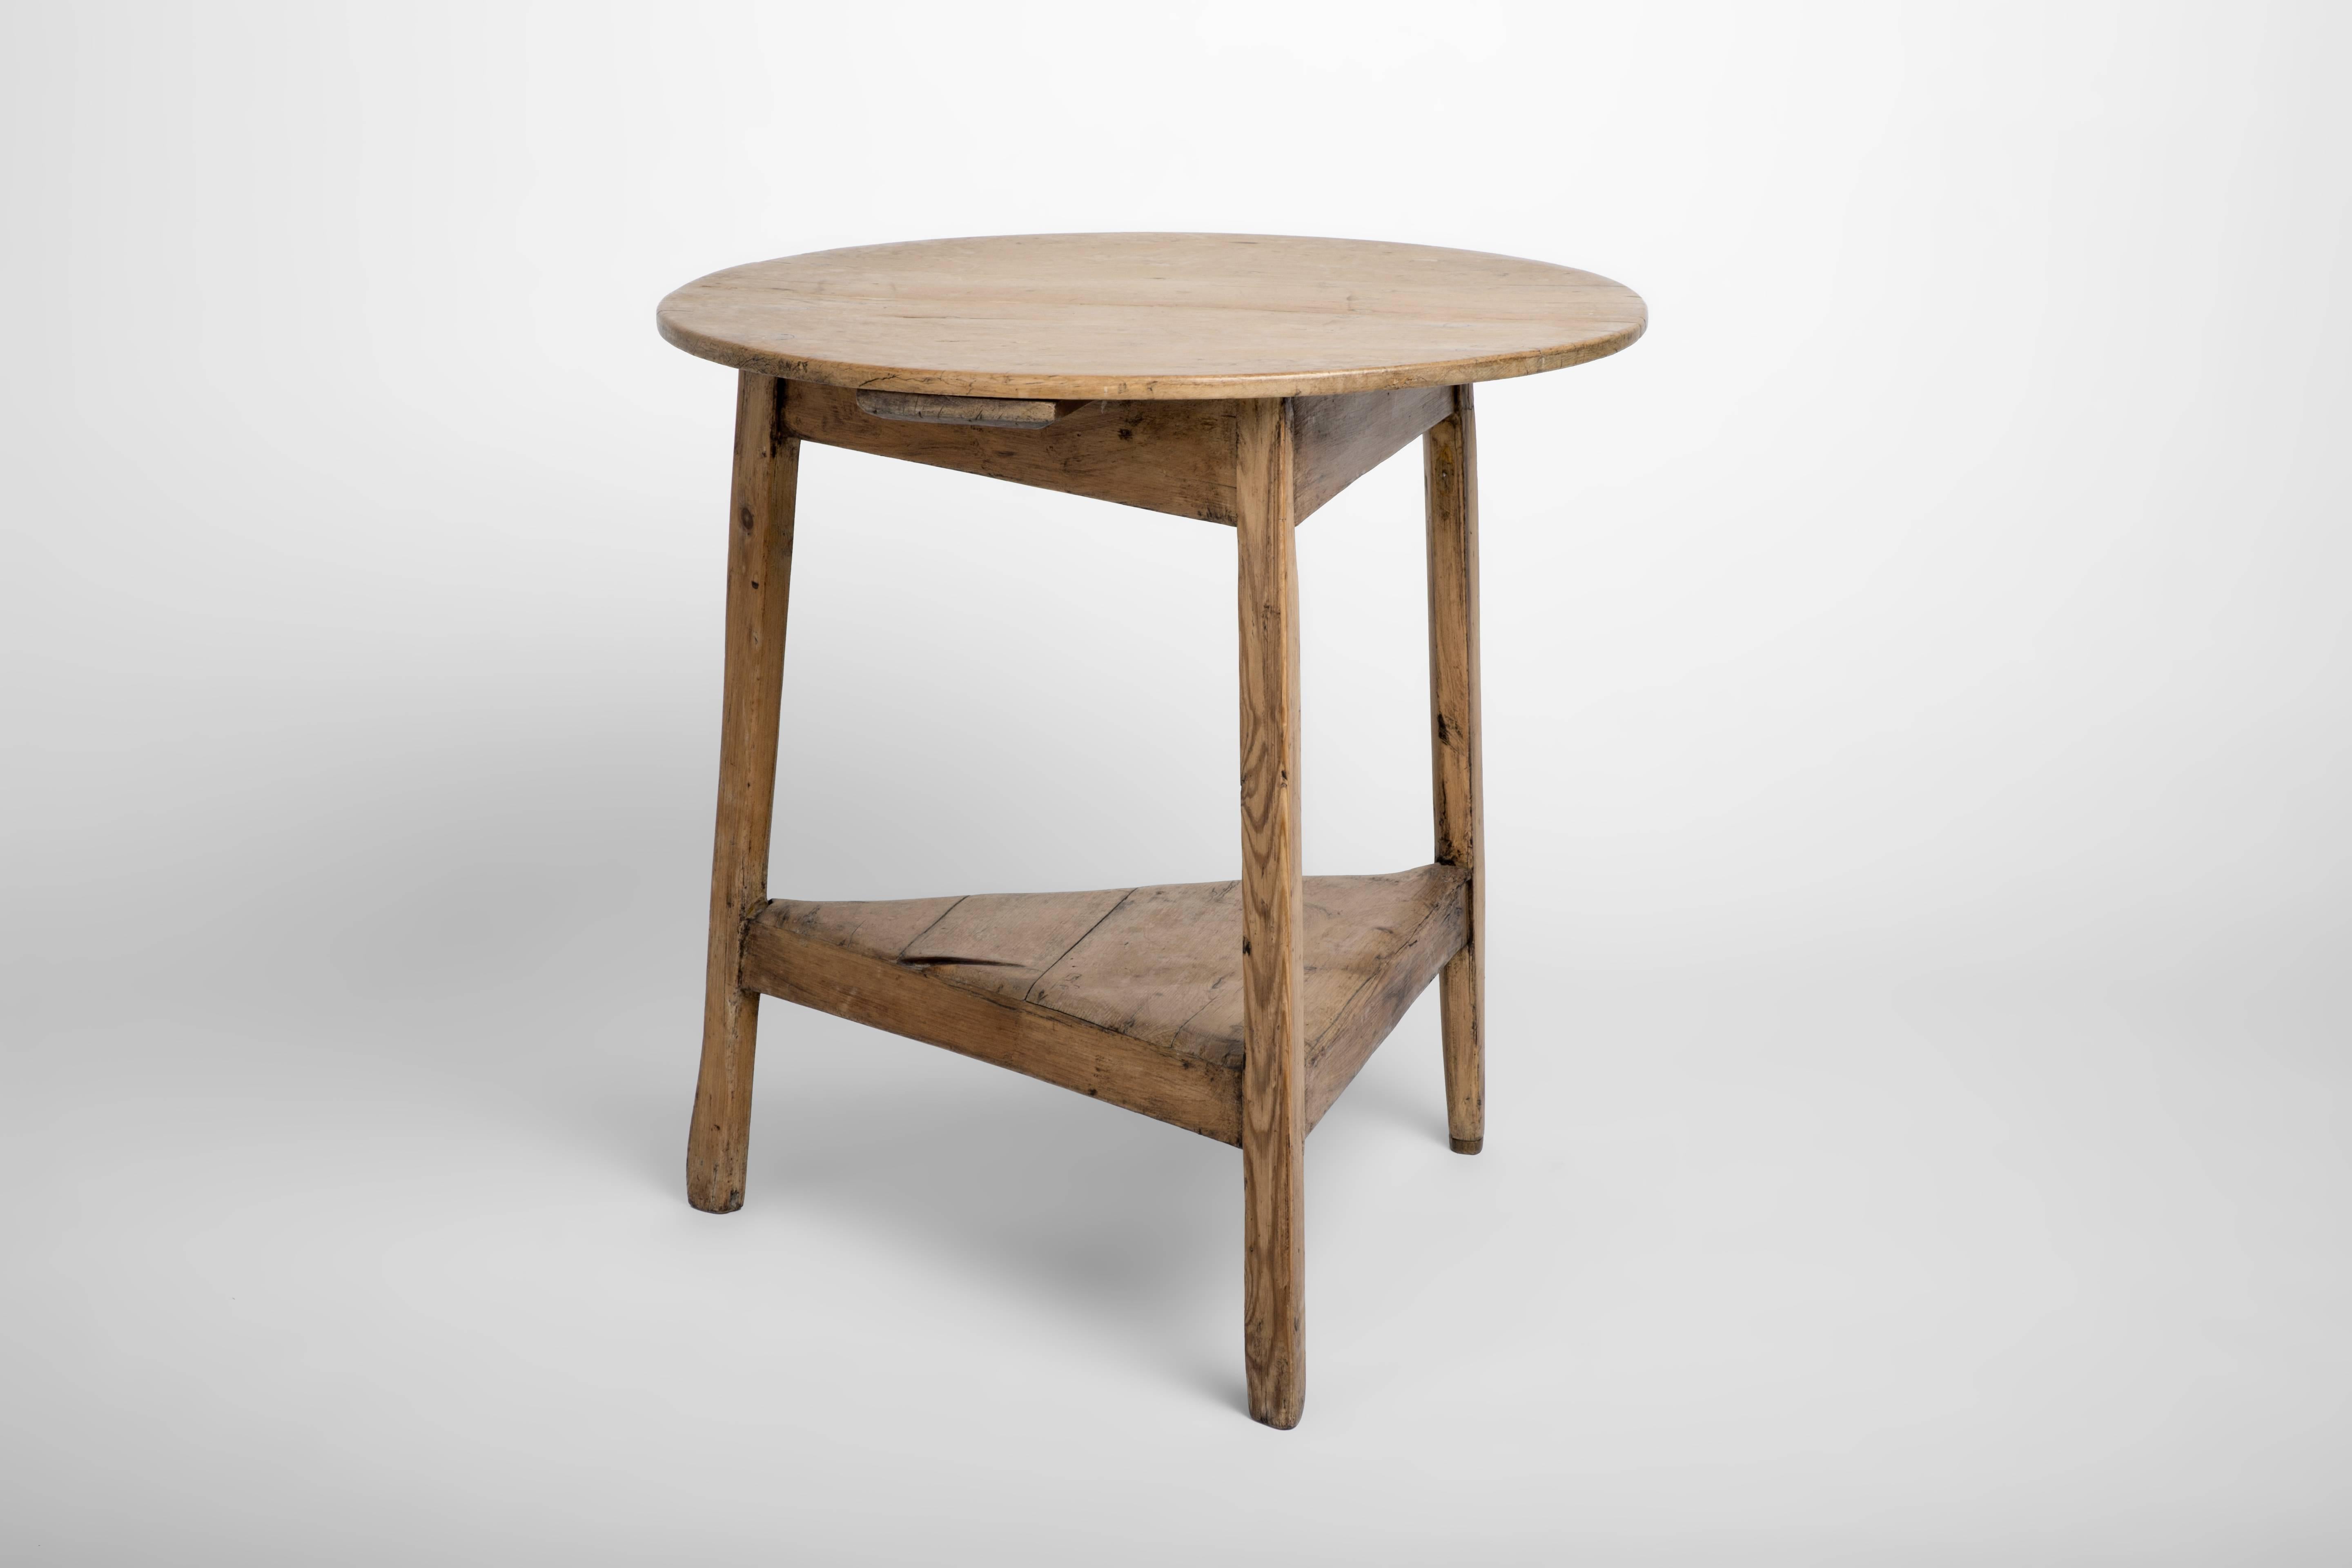 Vintage 19th century English cricket table standing on three legs with tray bottom. Cricket tables always had three legs to enhance stability on uneven ground and the bottom tray was to keep the beer out of the sun while the game was played.